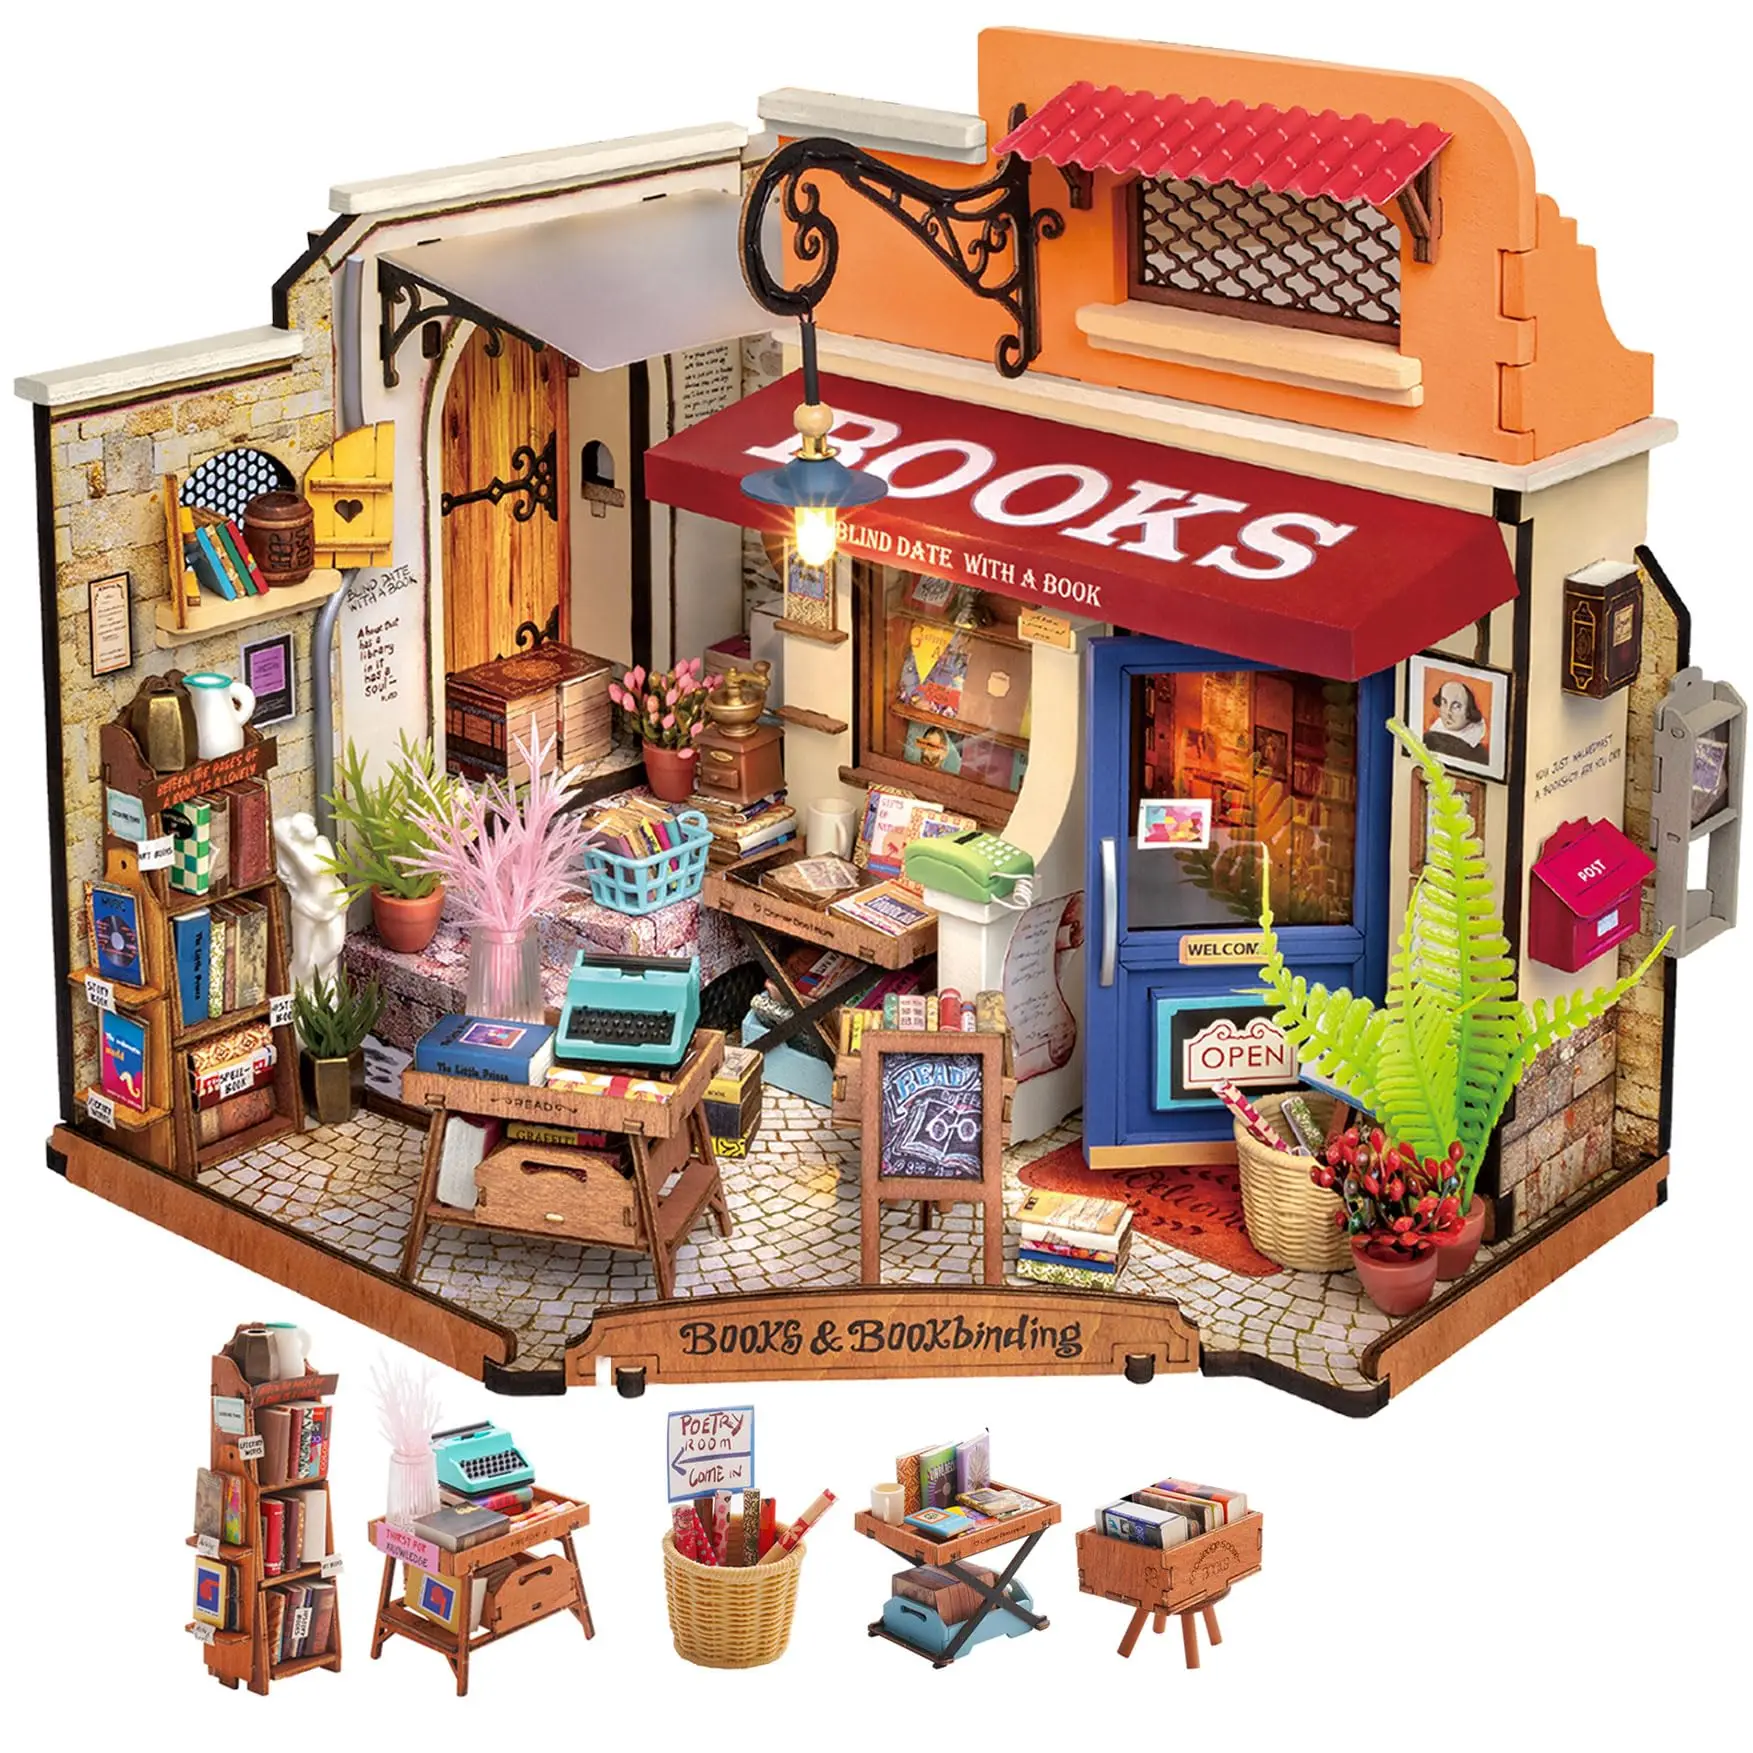 

Robotime Miniature House Kit DIY Dollhouse Corner Bookstore with LED DIY Dollhouse Craft Kits for Adults Birthday for Women Kids